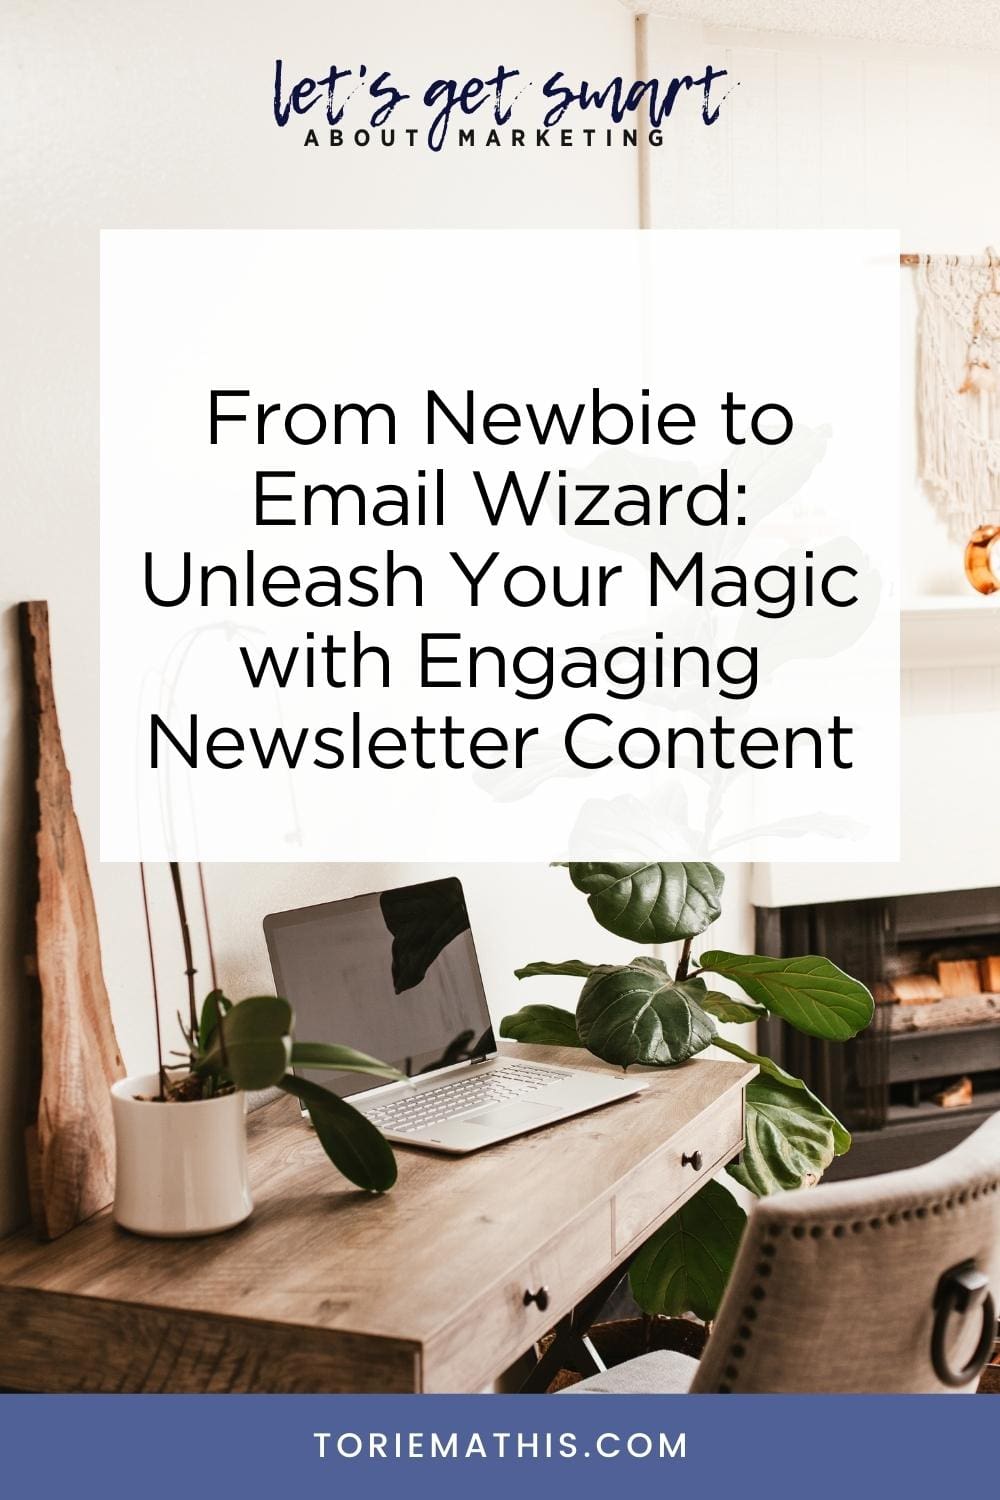 From Newbie to Email Wizard Unleash Your Magic with Engaging Newsletter Content